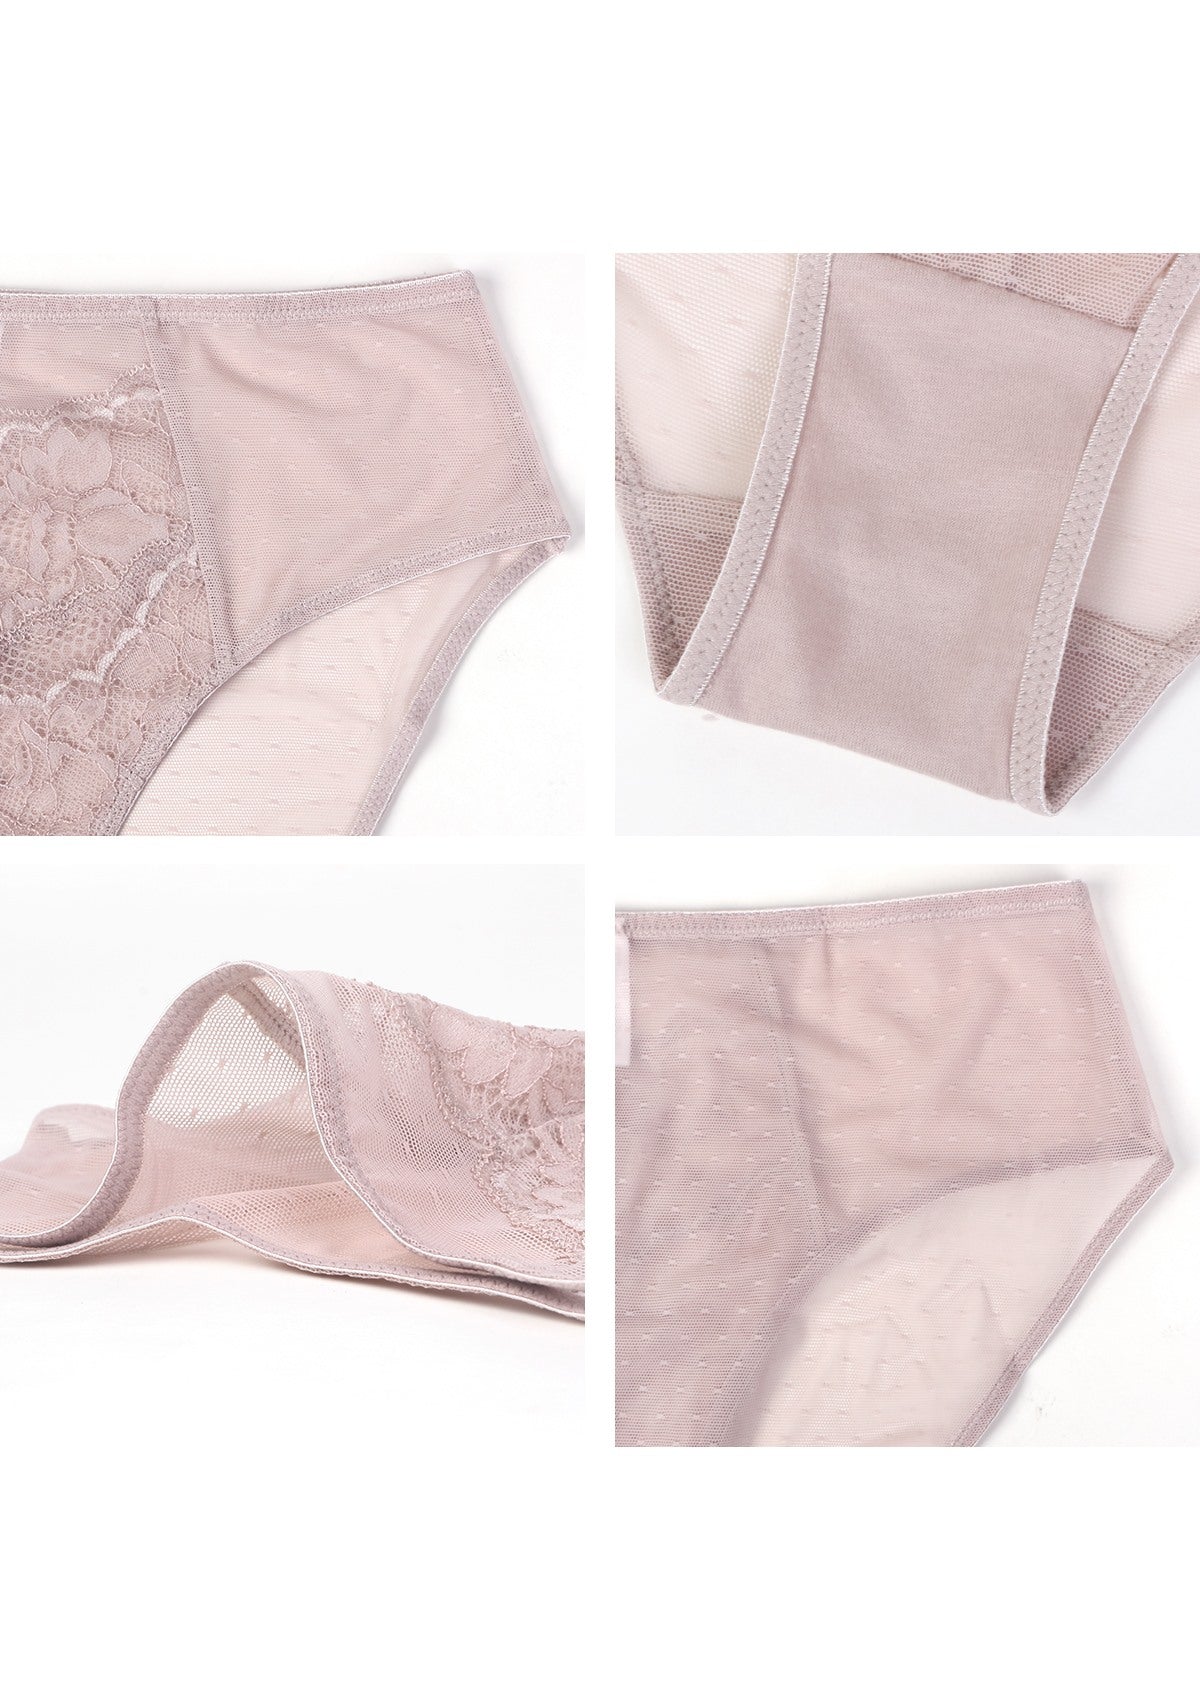 HSIA Enchante High-Rise Floral Lacy Panty-Comfort In Style - XXXL / Dark Pink